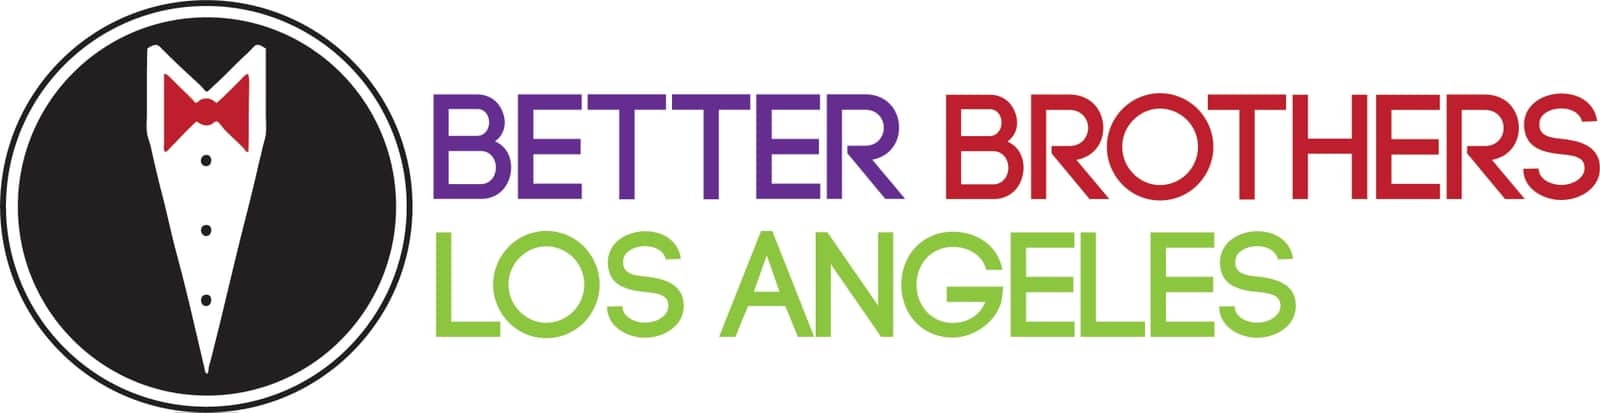 Better Brothers Los Angeles